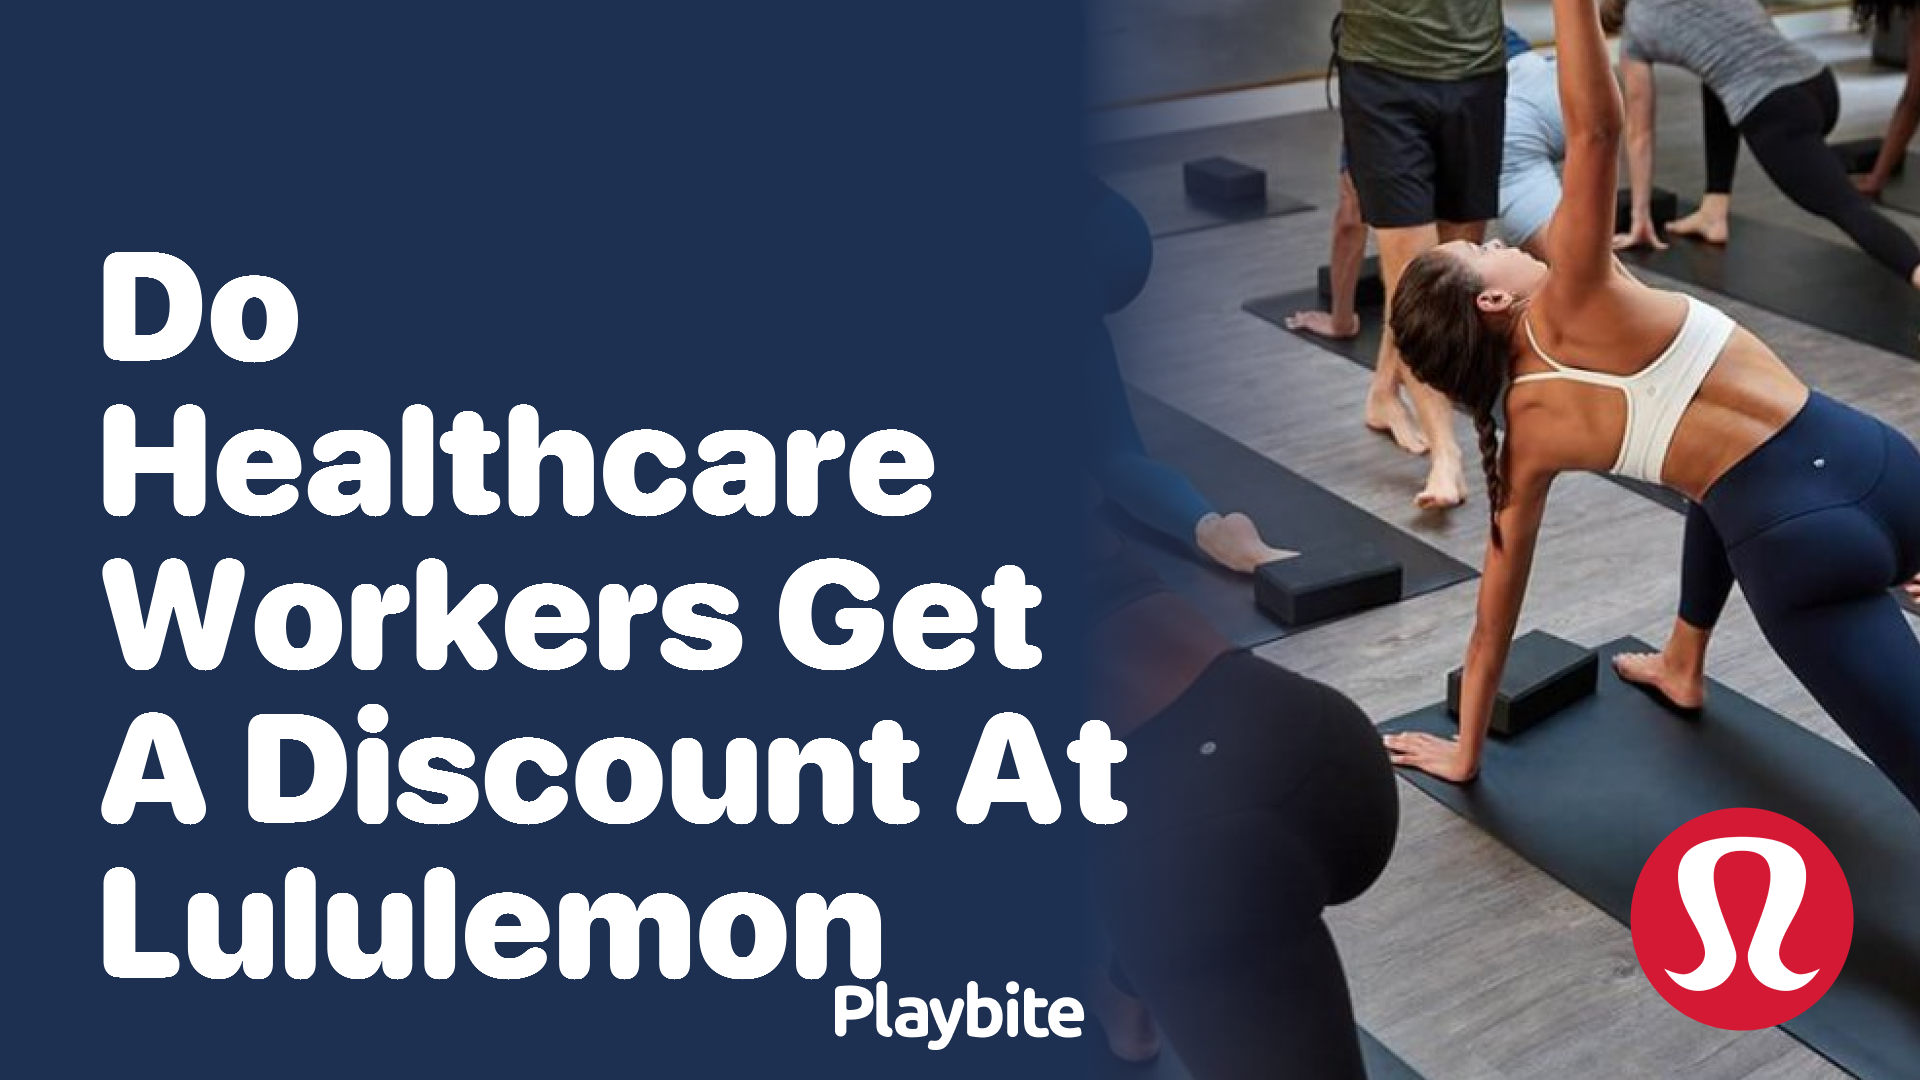 lululemon discount for healthcare workers